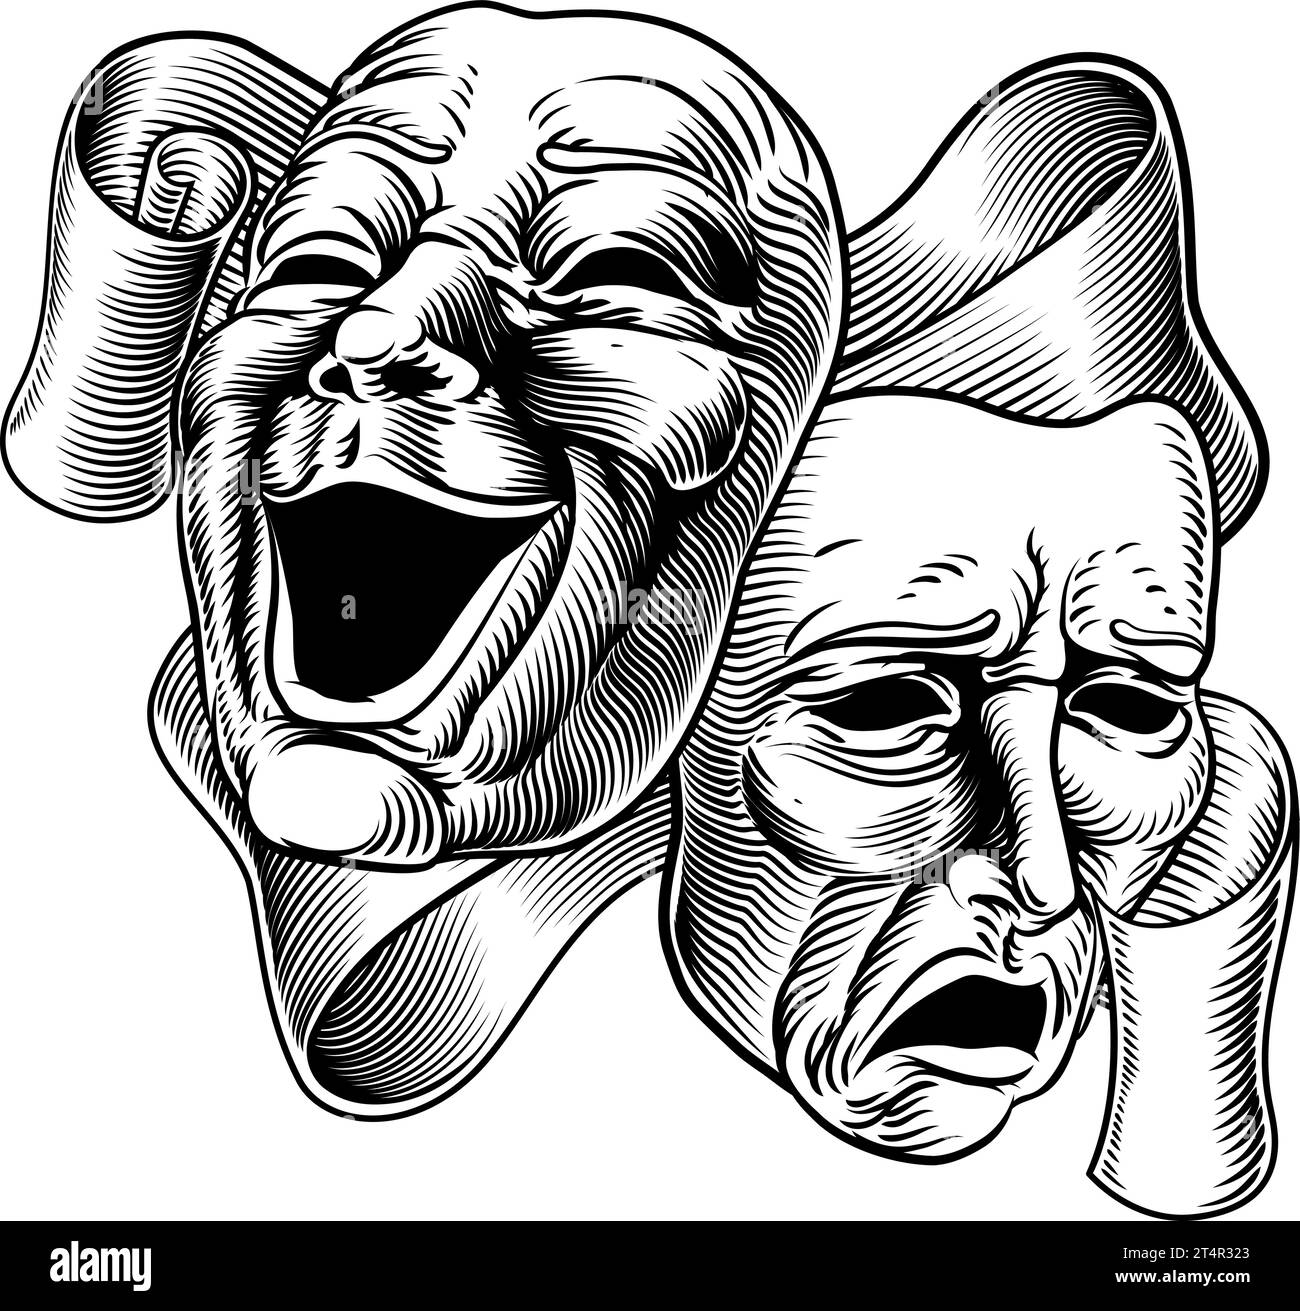 Theater mask with ribbons. Comedy and tragedy masks isolated on